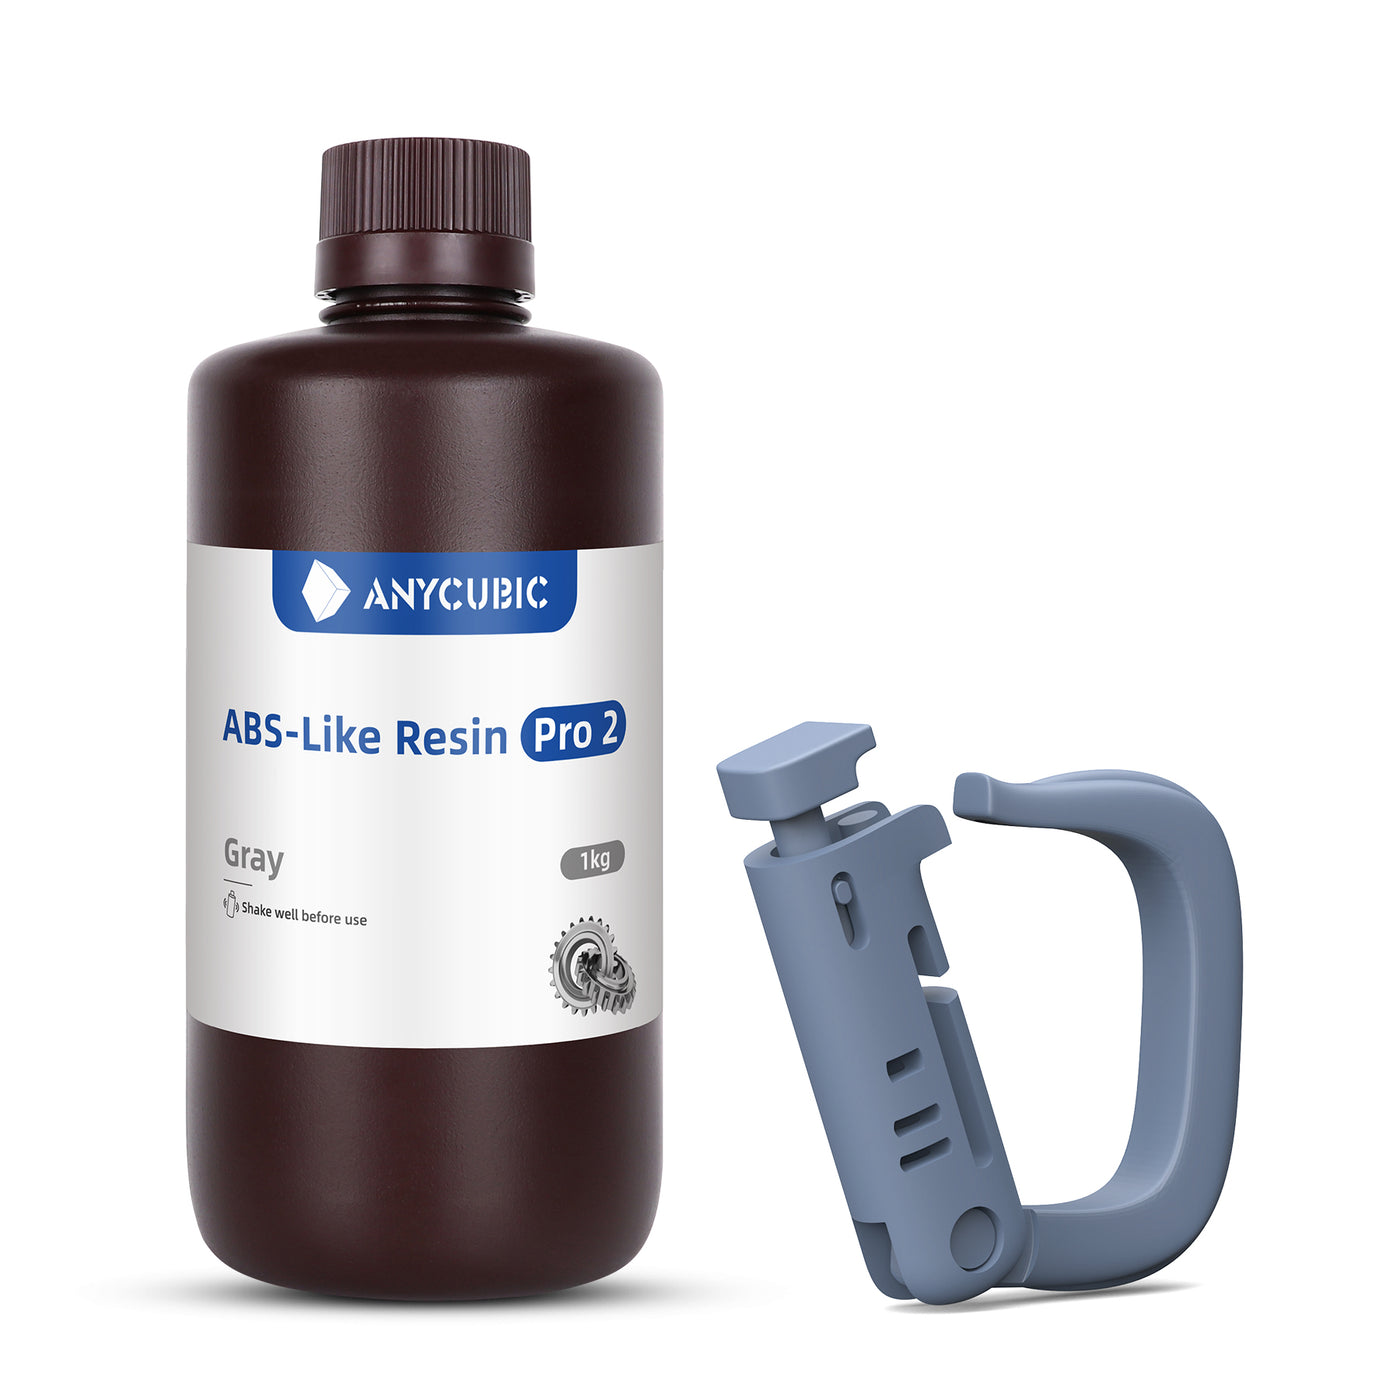 ABS-Like Resin Pro 2 - Get 3 for the Price of 2